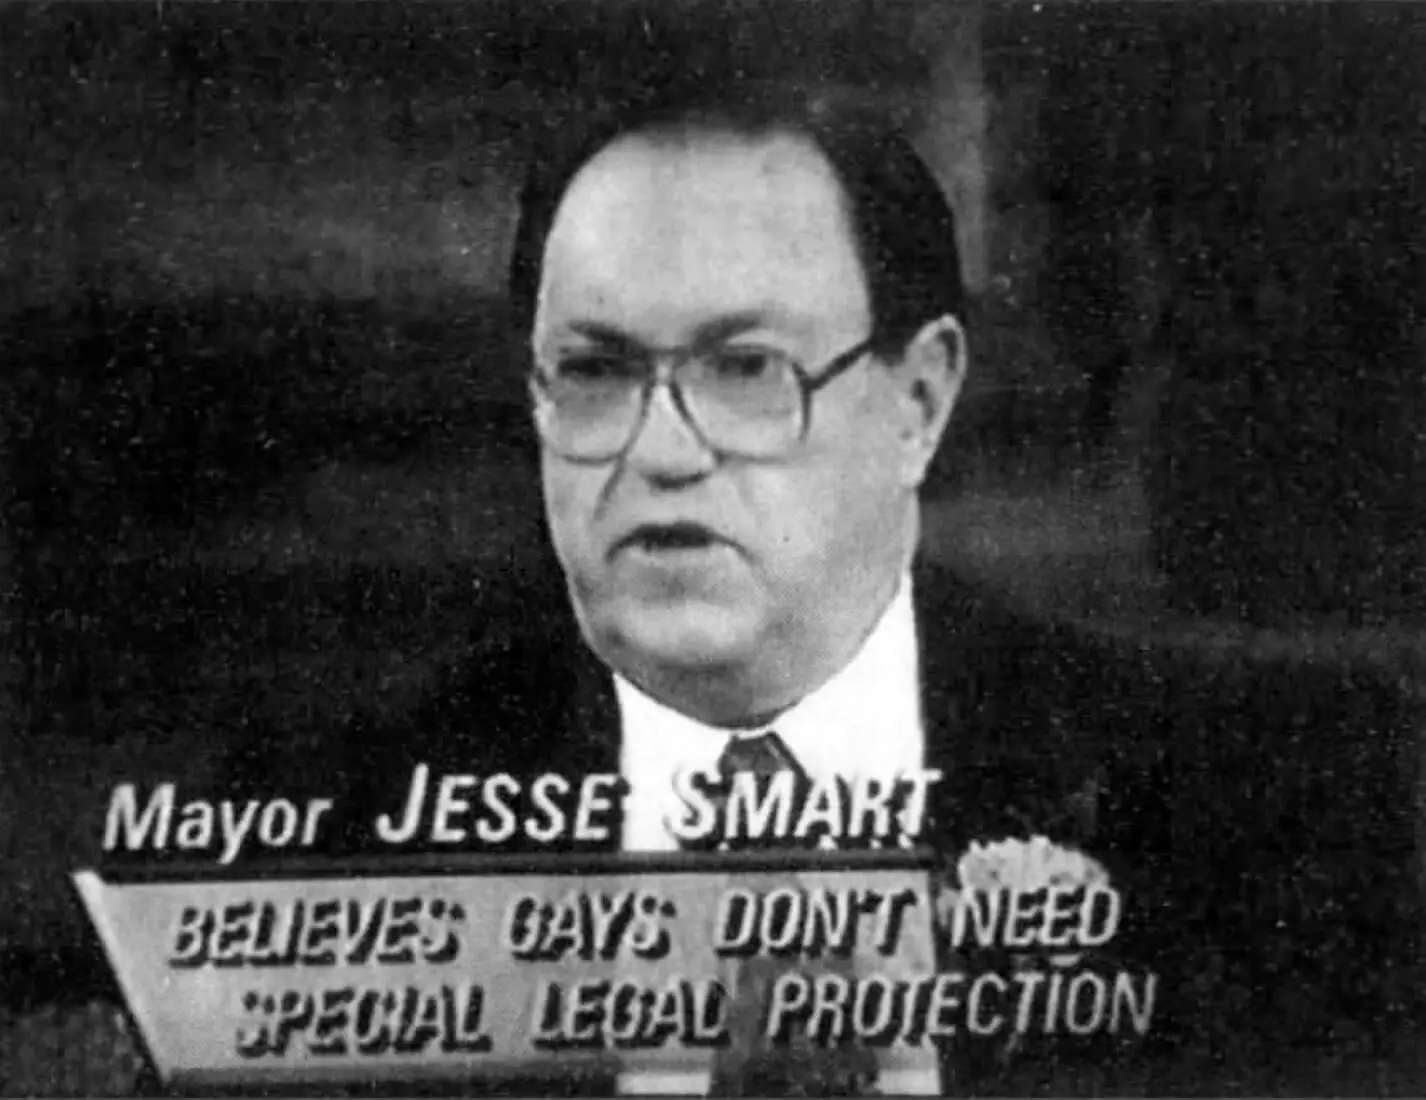 A black and white still shot from a TV screen showing an older white man wearing a suit, tie, and glasses.